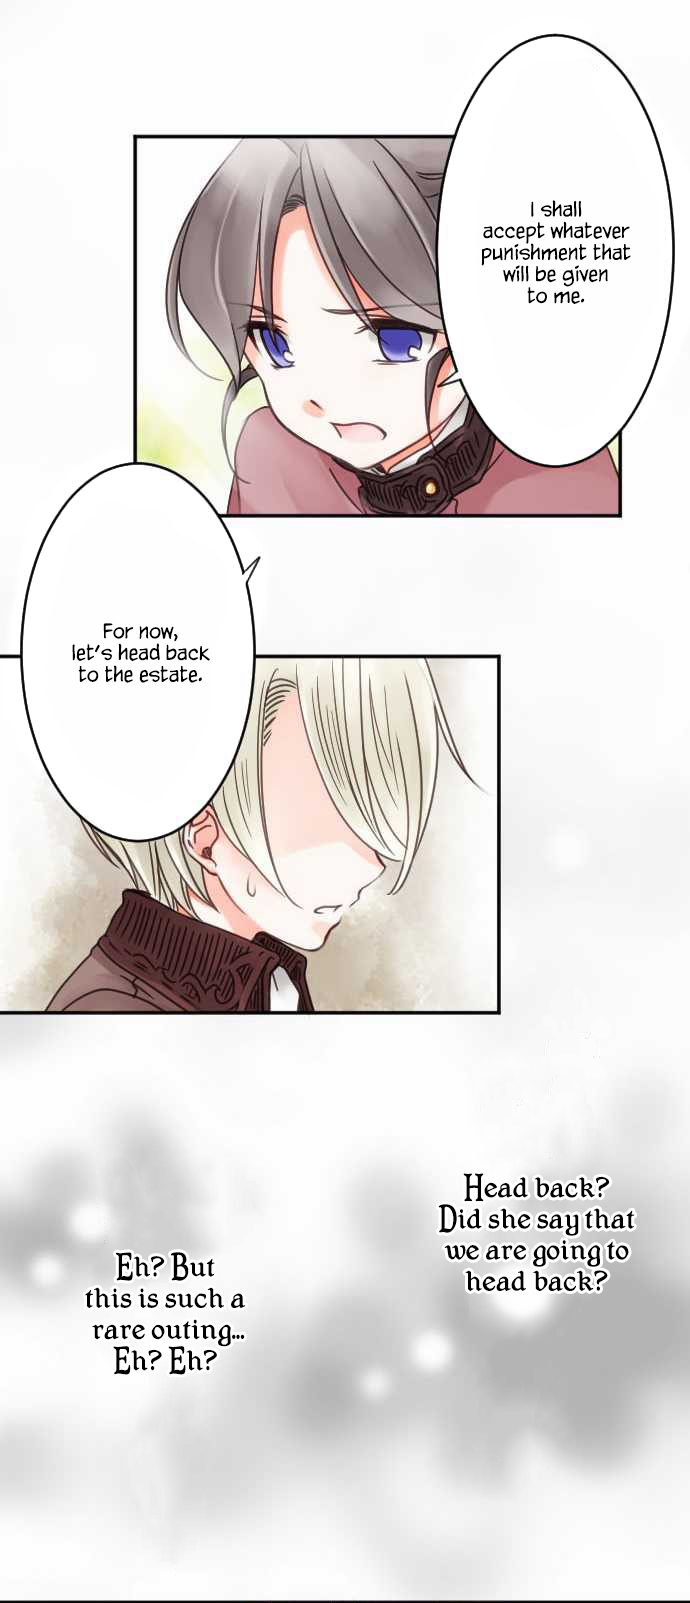 Young Master and Maid Ch.10